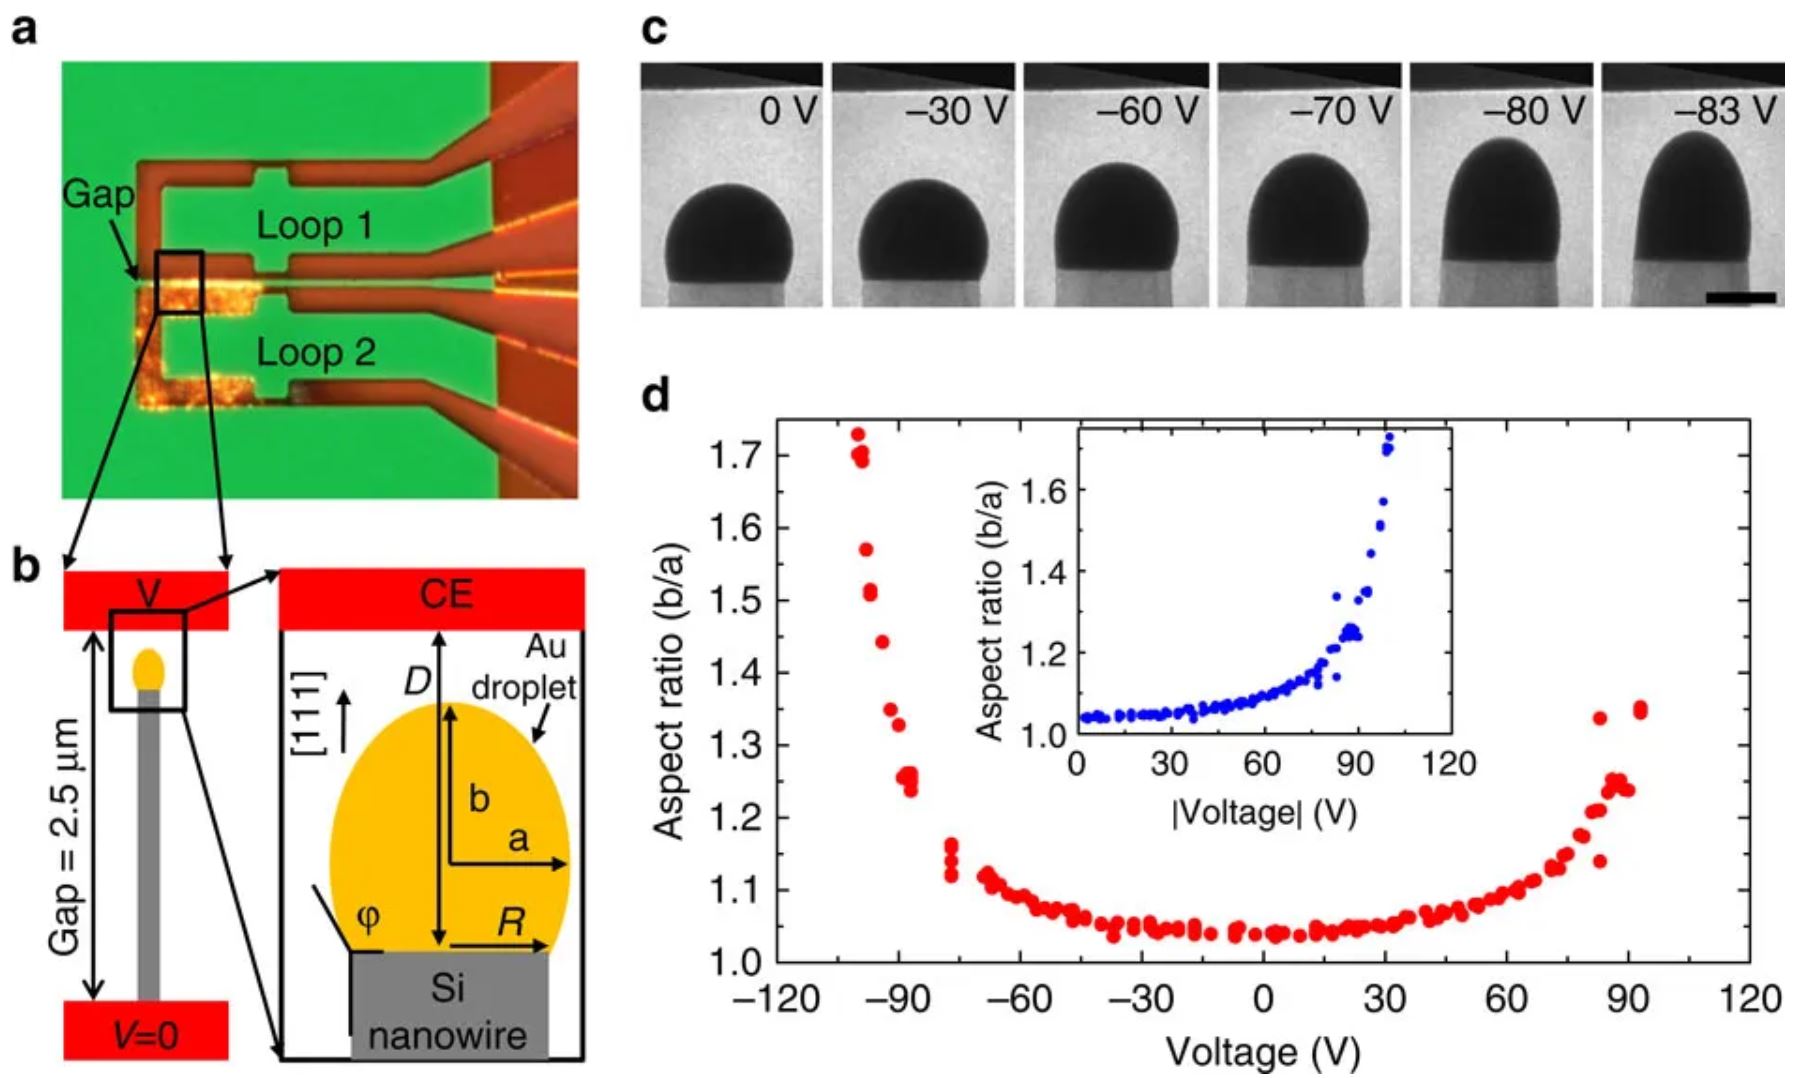 Controlling nanowire growth through electric field-induced deformation of the catalyst droplet